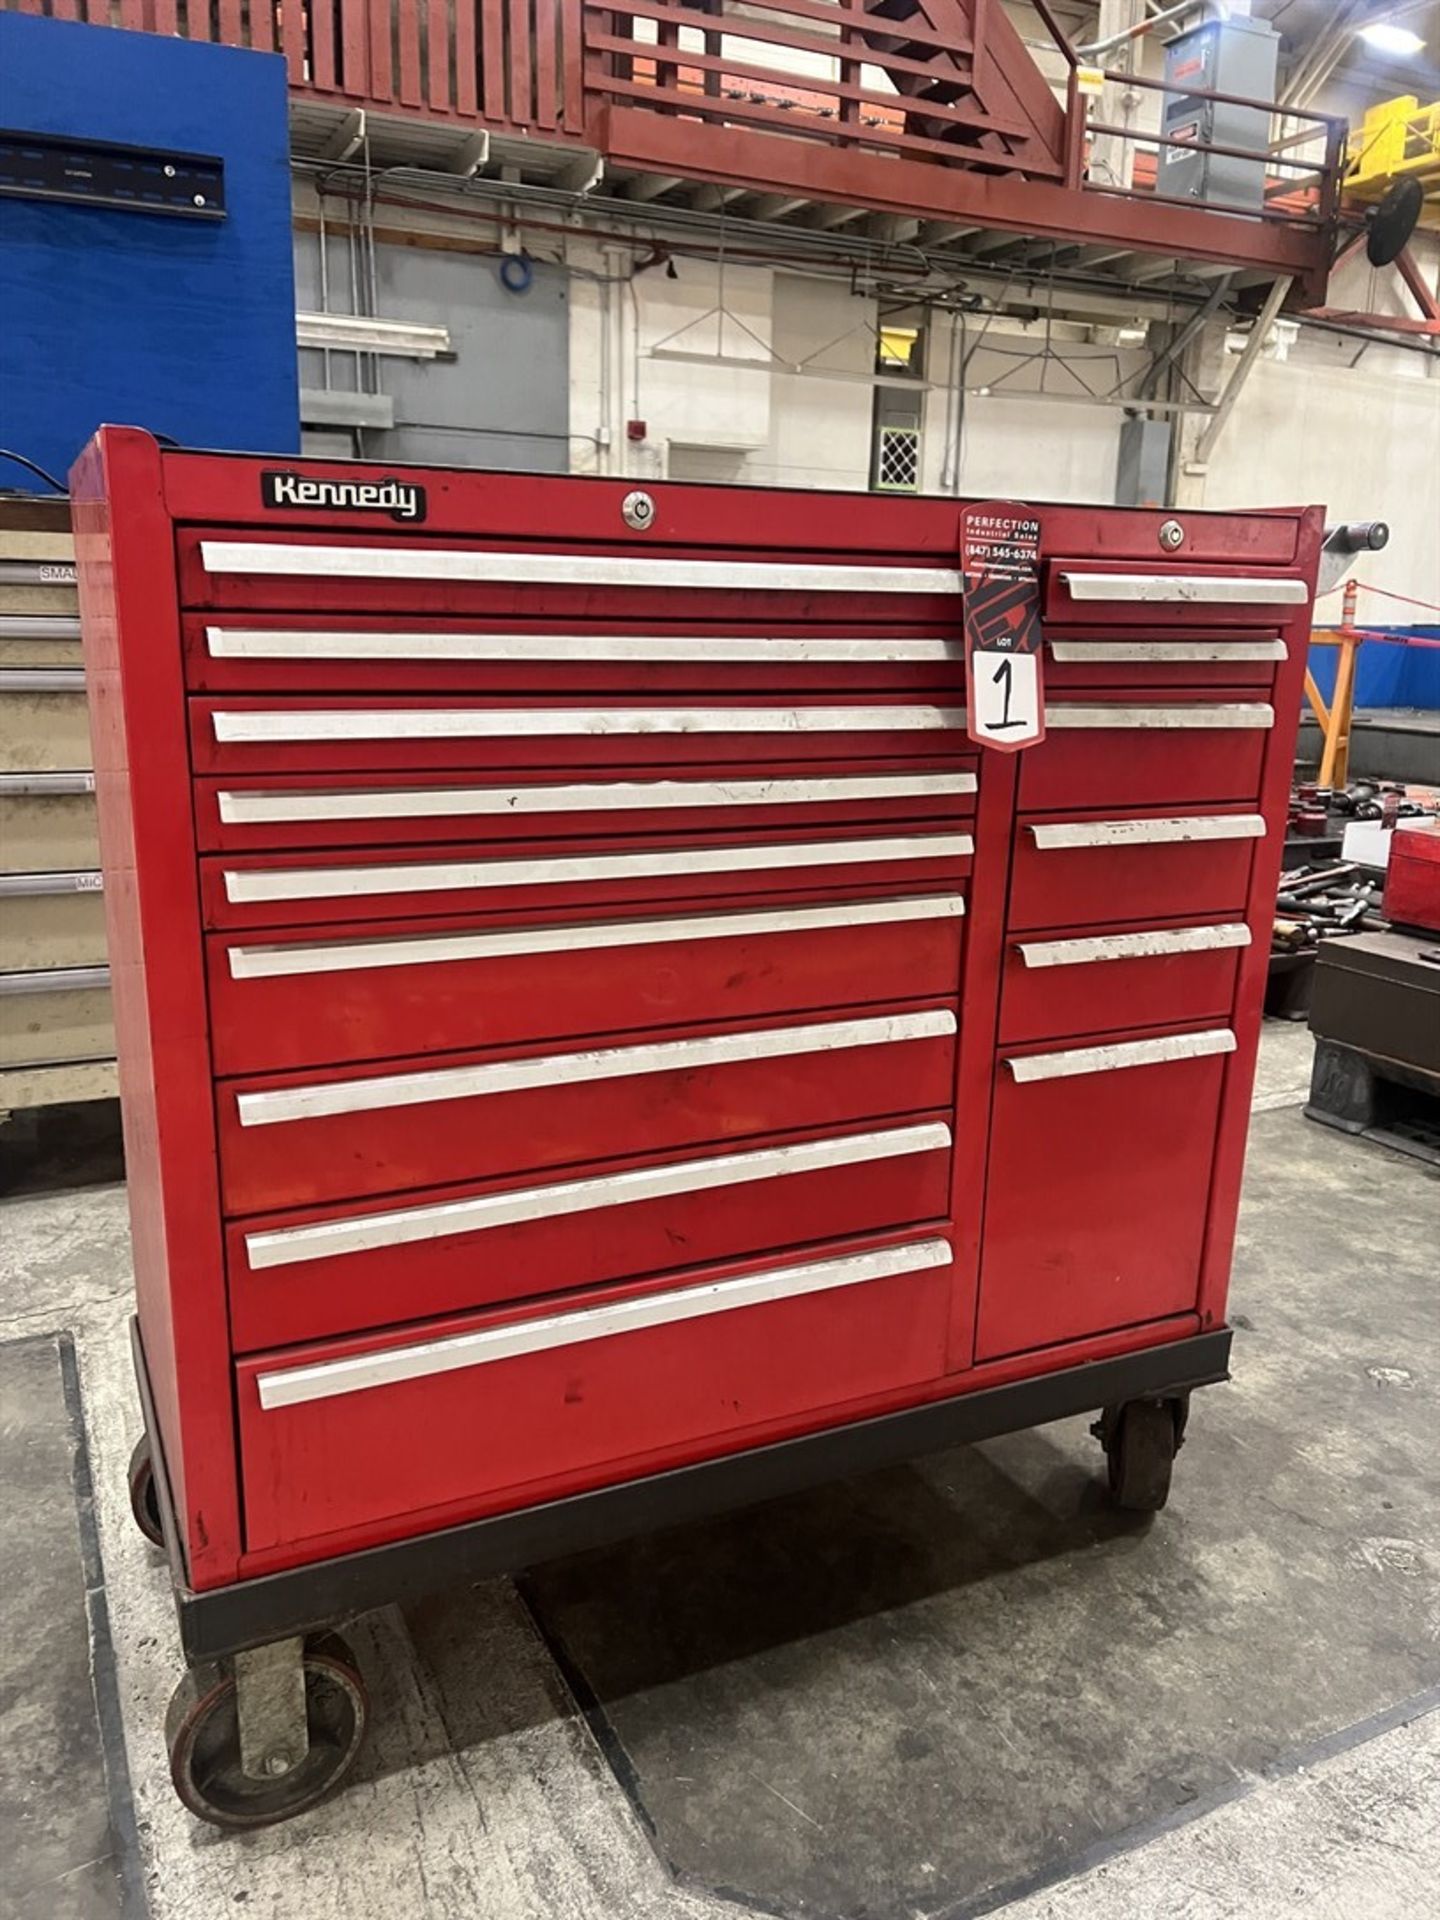 KENNEDY Rolling Tool Chest